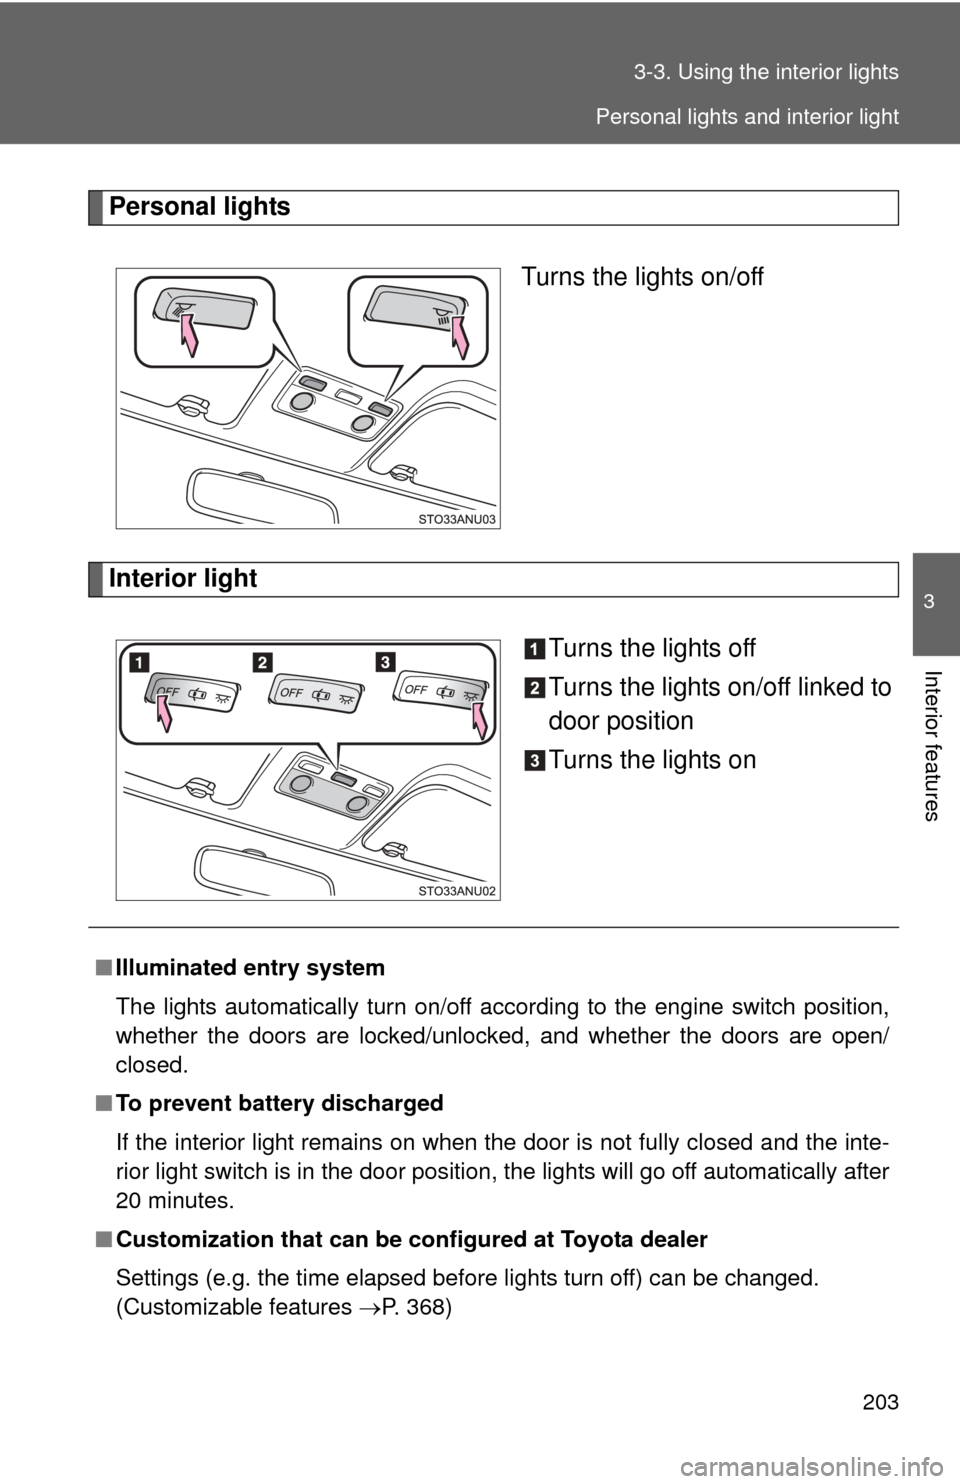 TOYOTA YARIS 2013 3.G User Guide 203
3-3. Using the interior lights
3
Interior features
Personal lights
Turns the lights on/off
Interior light Turns the lights off
Turns the lights on/off linked to
door position
Turns the lights on
�